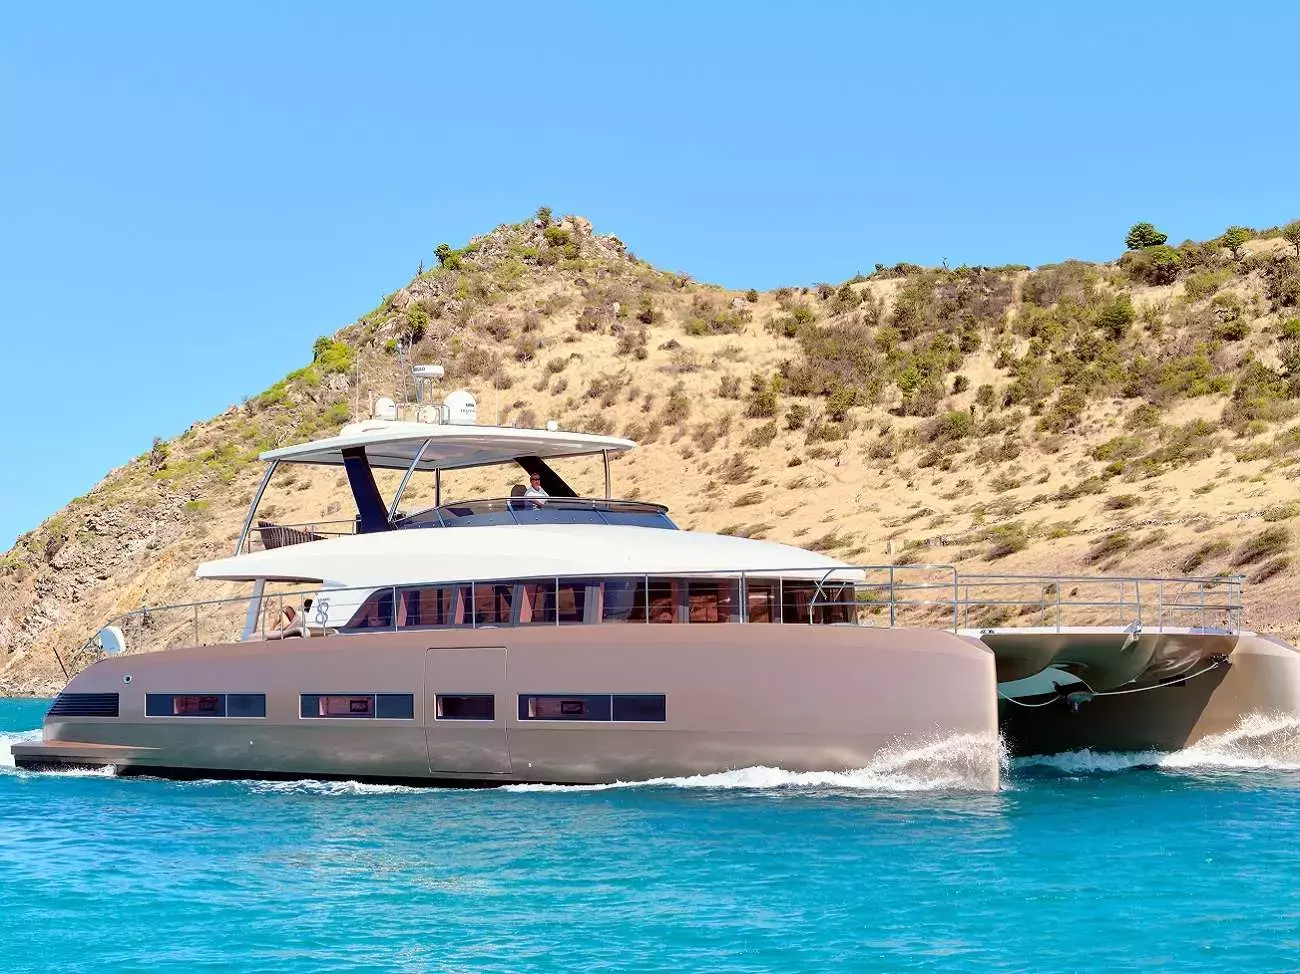 Frenchwest by Lagoon - Top rates for a Rental of a private Power Catamaran in St Lucia